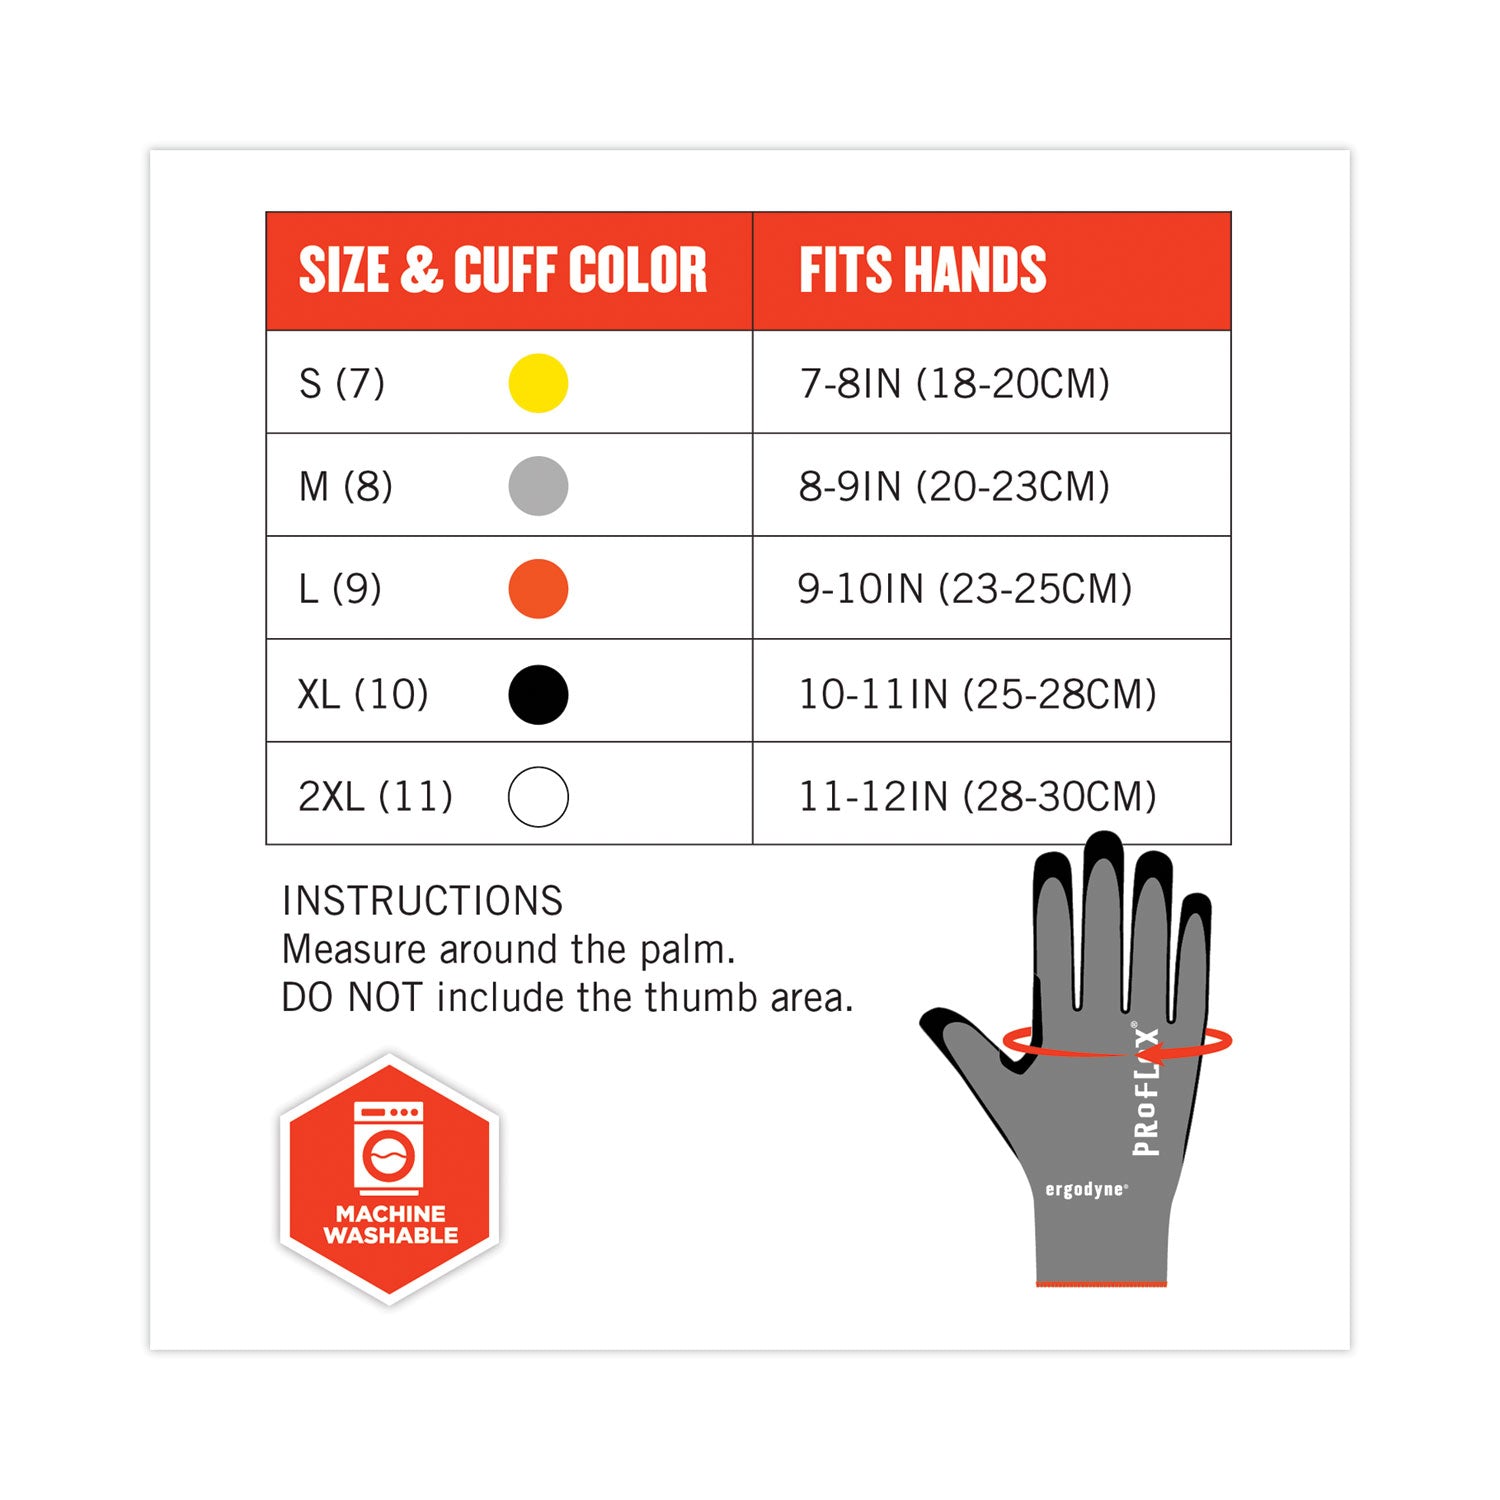 proflex-7072-ansi-a7-nitrile-coated-cr-gloves-gray-large-pair-ships-in-1-3-business-days_ego10314 - 7